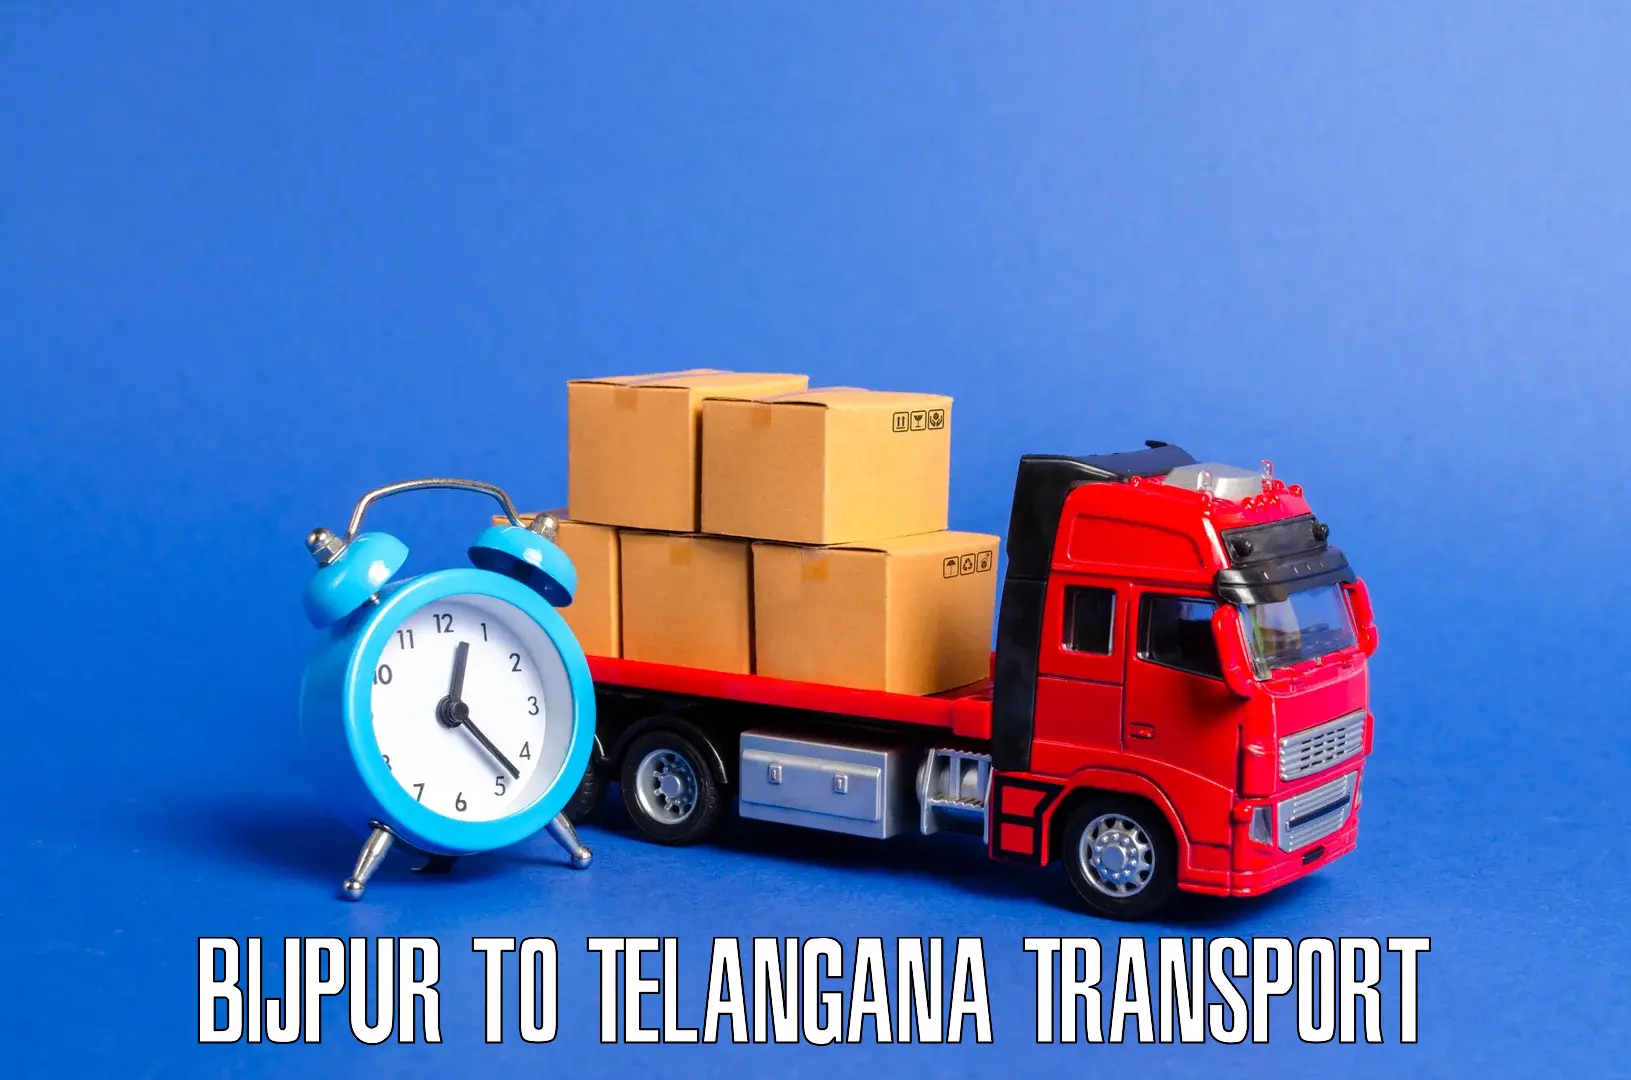 Daily transport service Bijpur to Odela